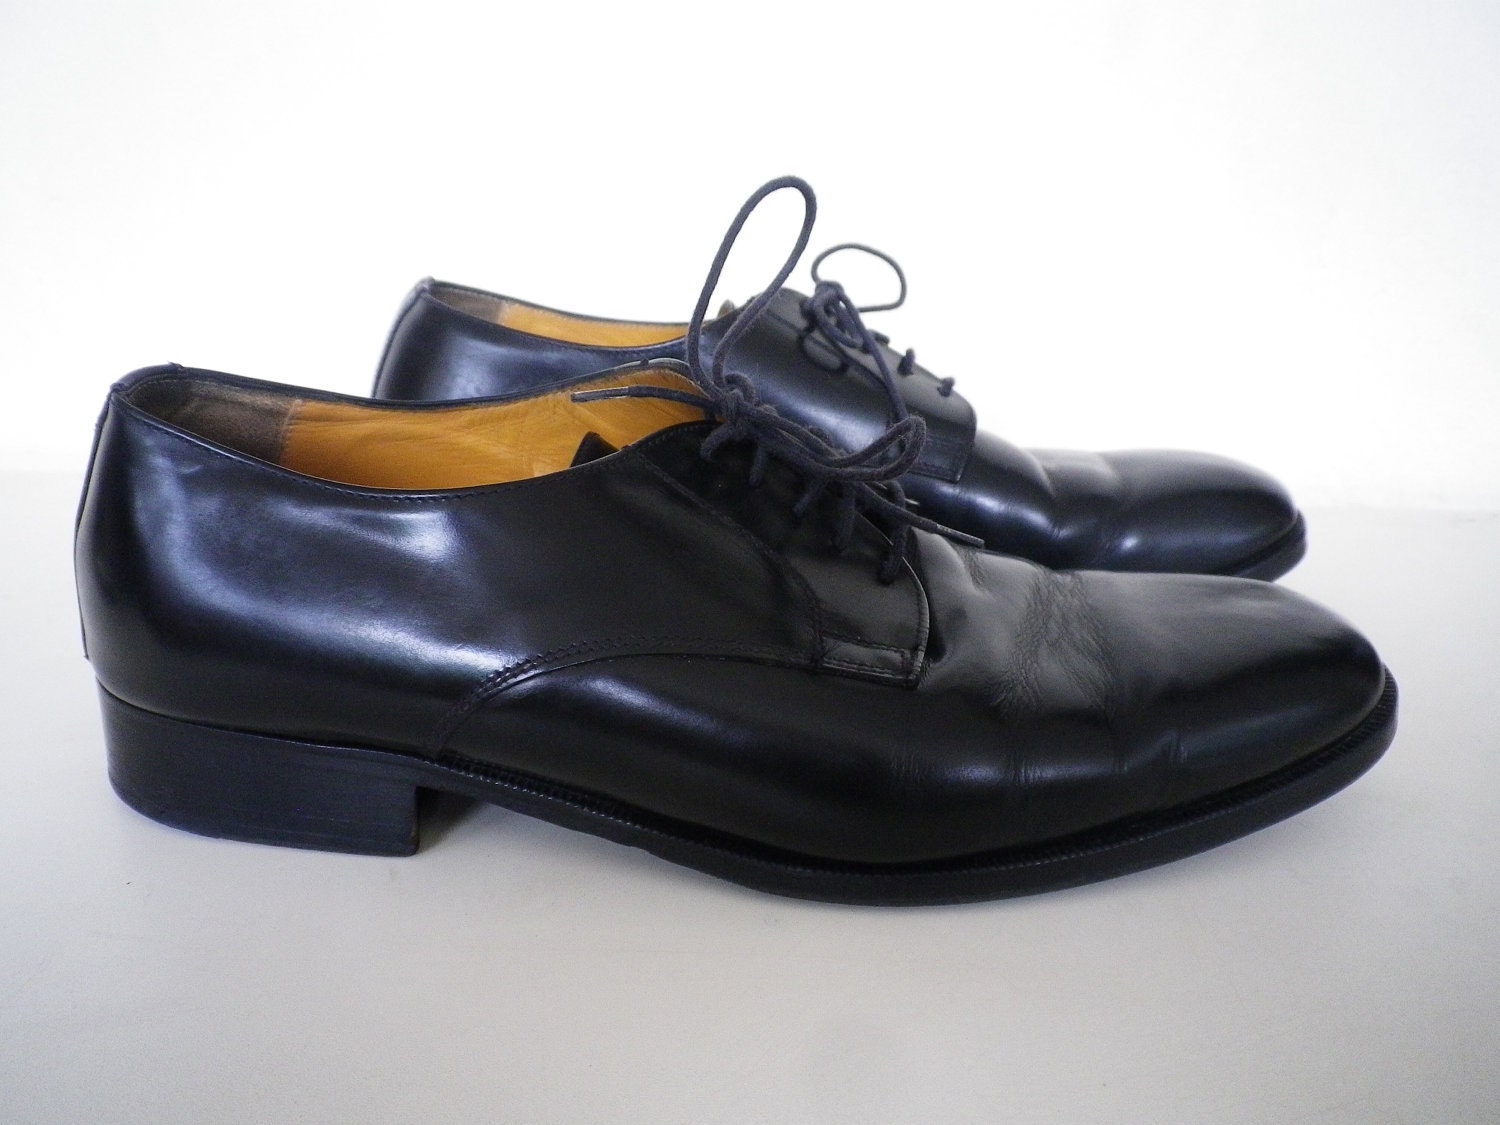 Pierre Cardin Shoes French Vintage Classic Mens